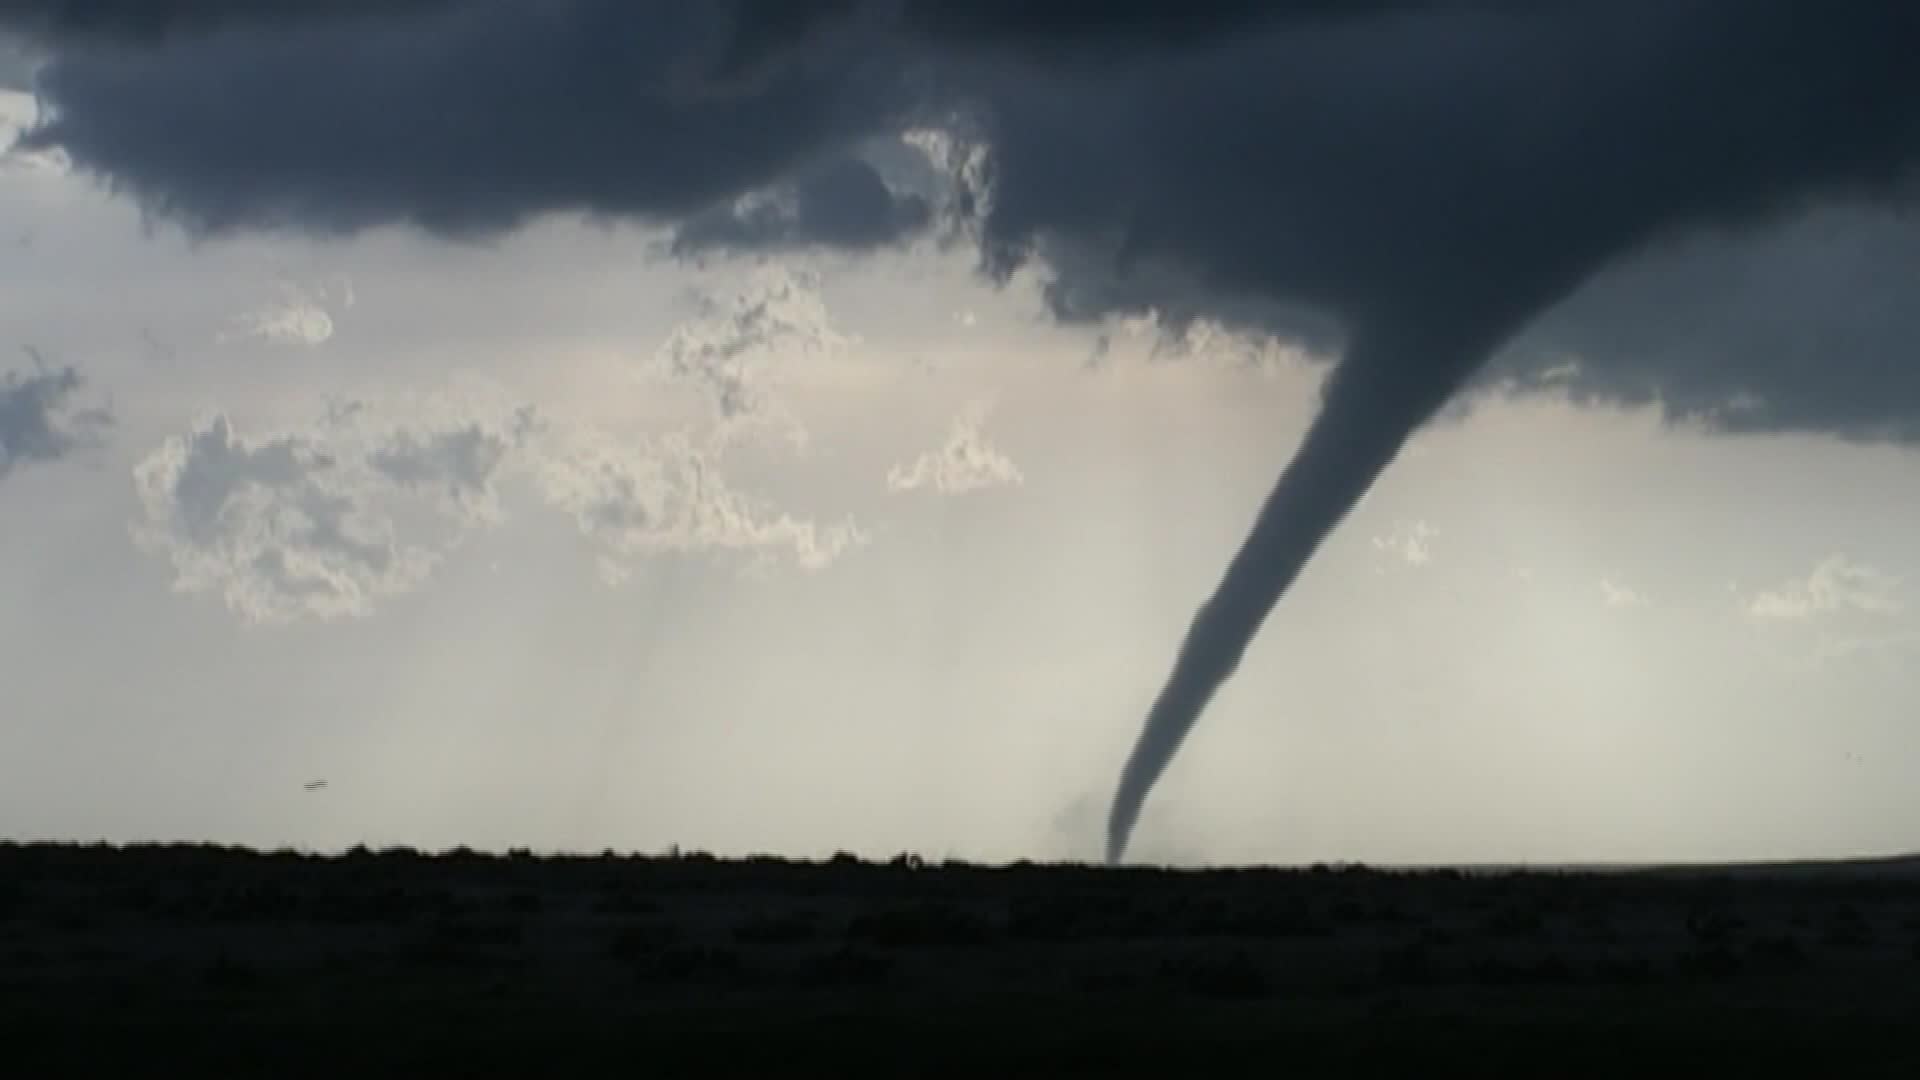 Oklahoma Reports Tornadoes As the Central United States Gets Ready for Extreme Weather